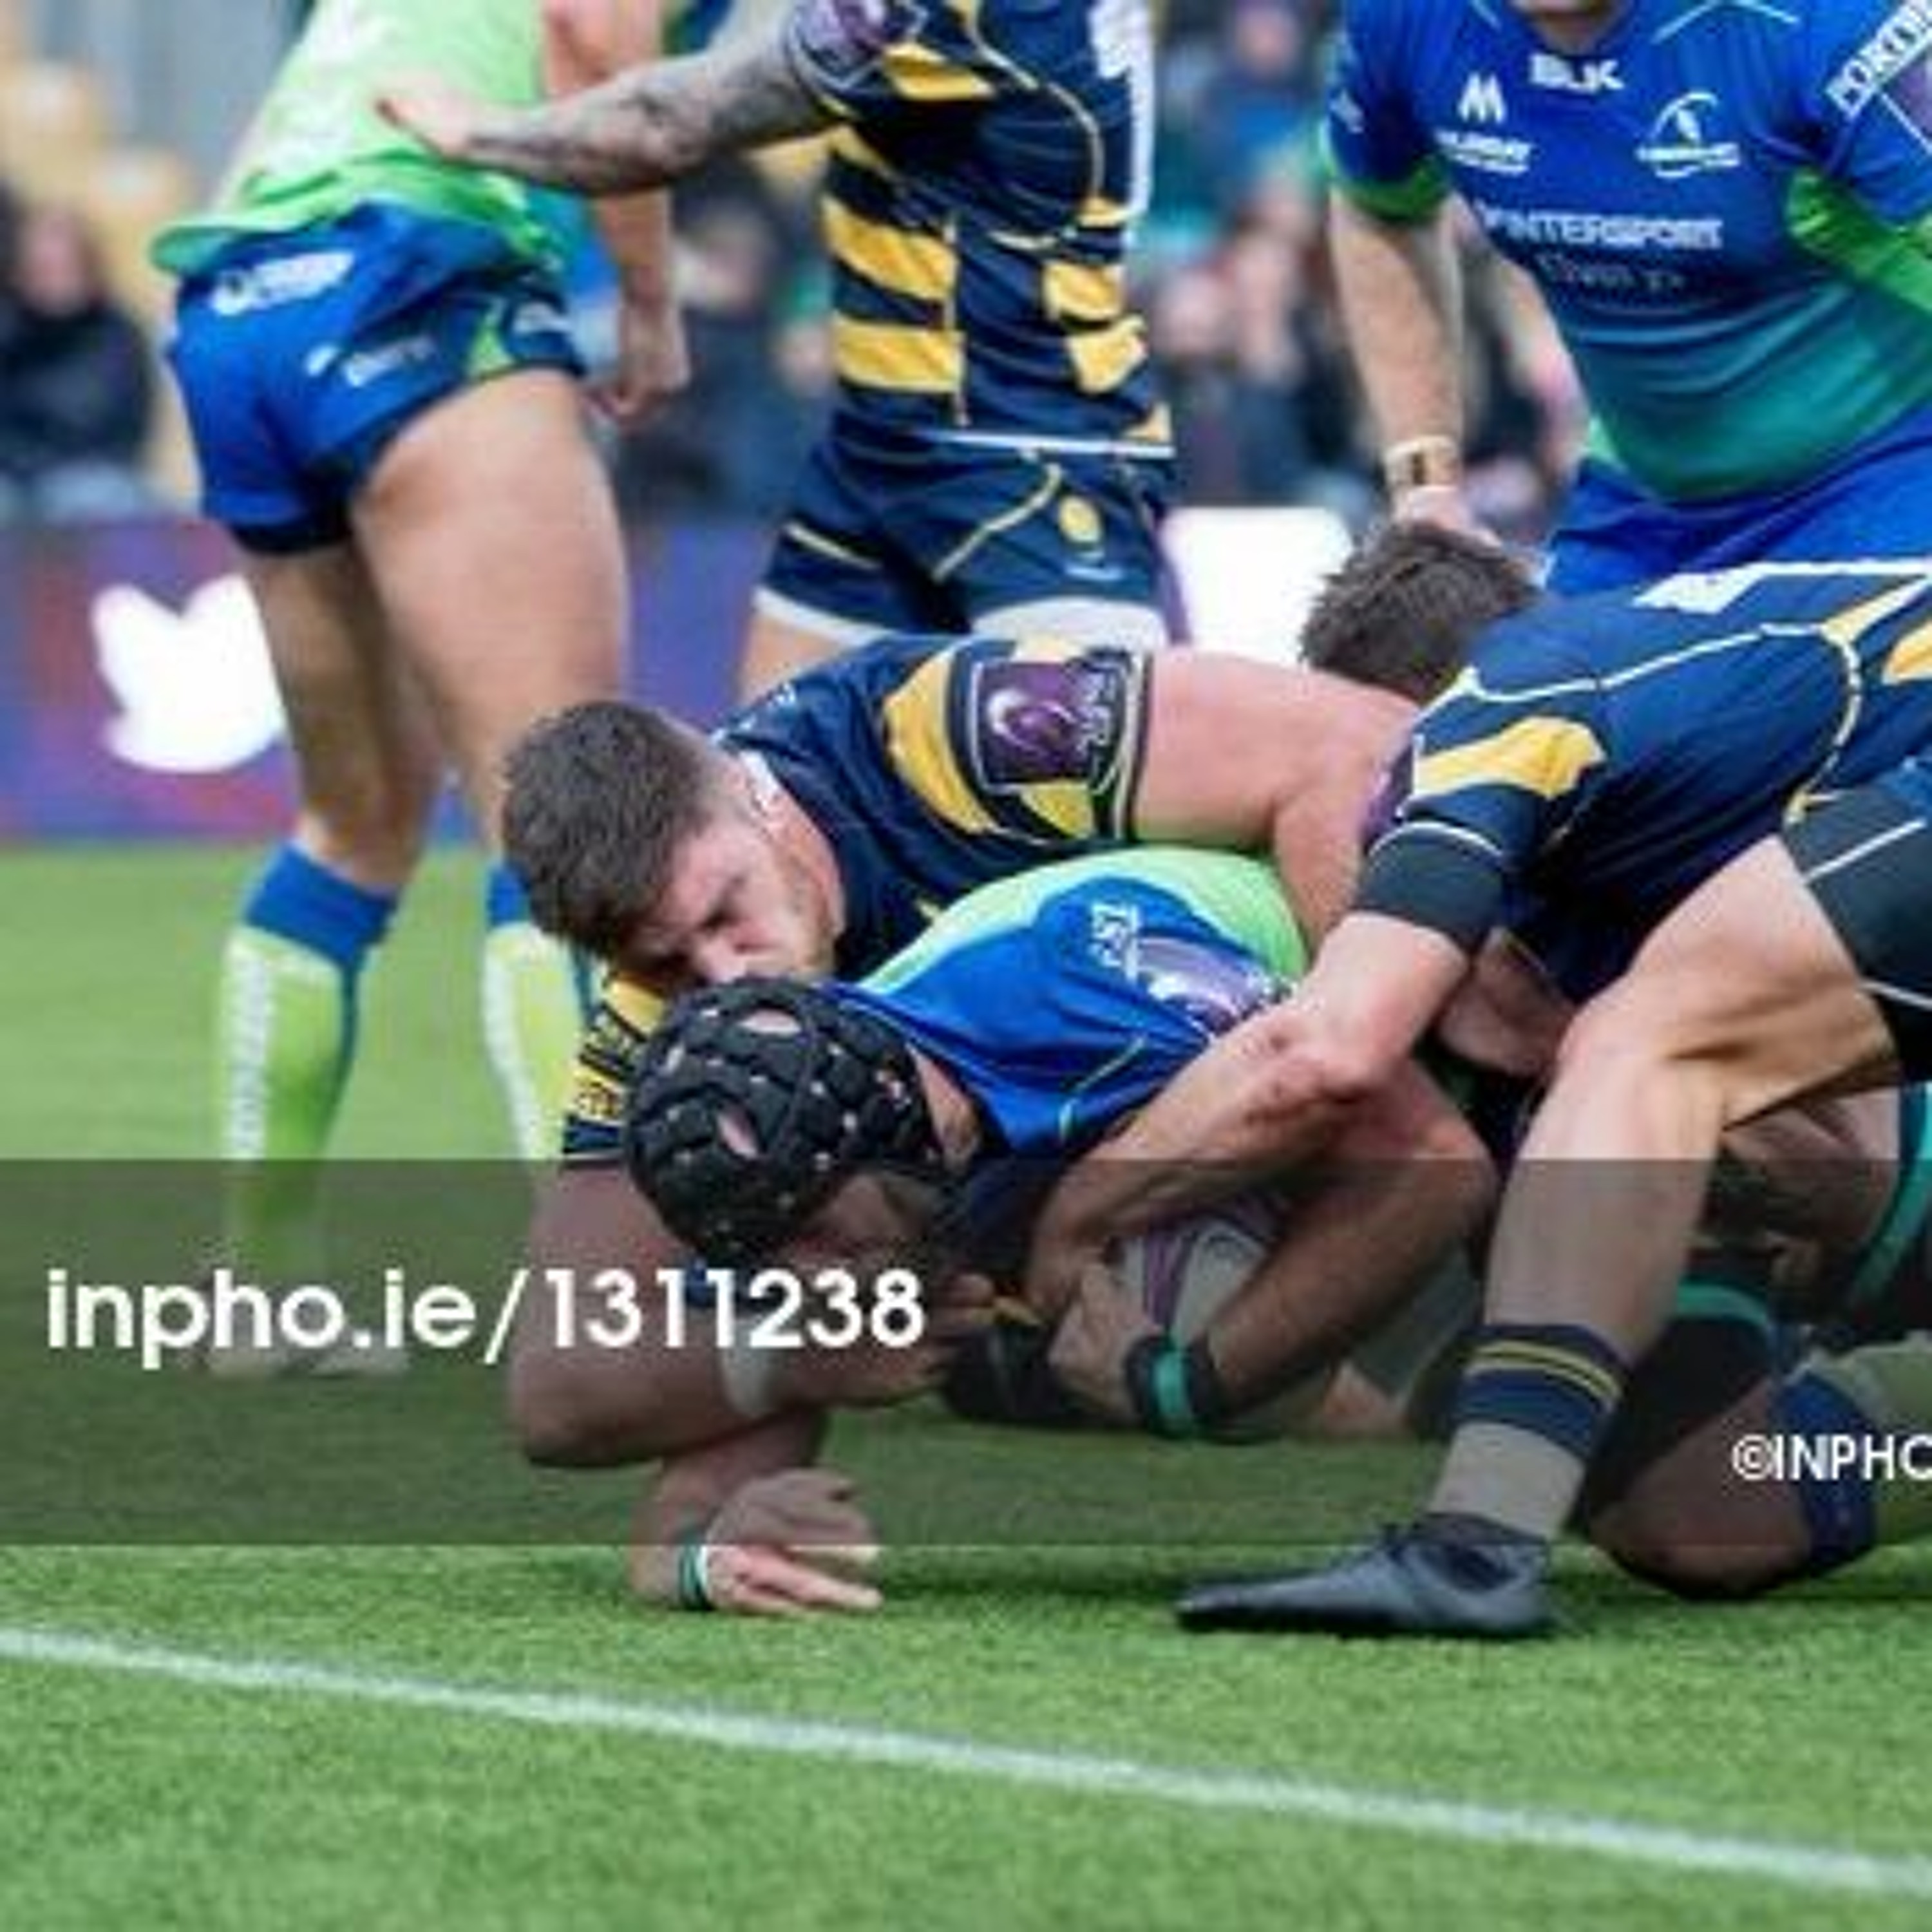 Connacht draw with Worcester in a Wild One - Craggy Rugby podcast